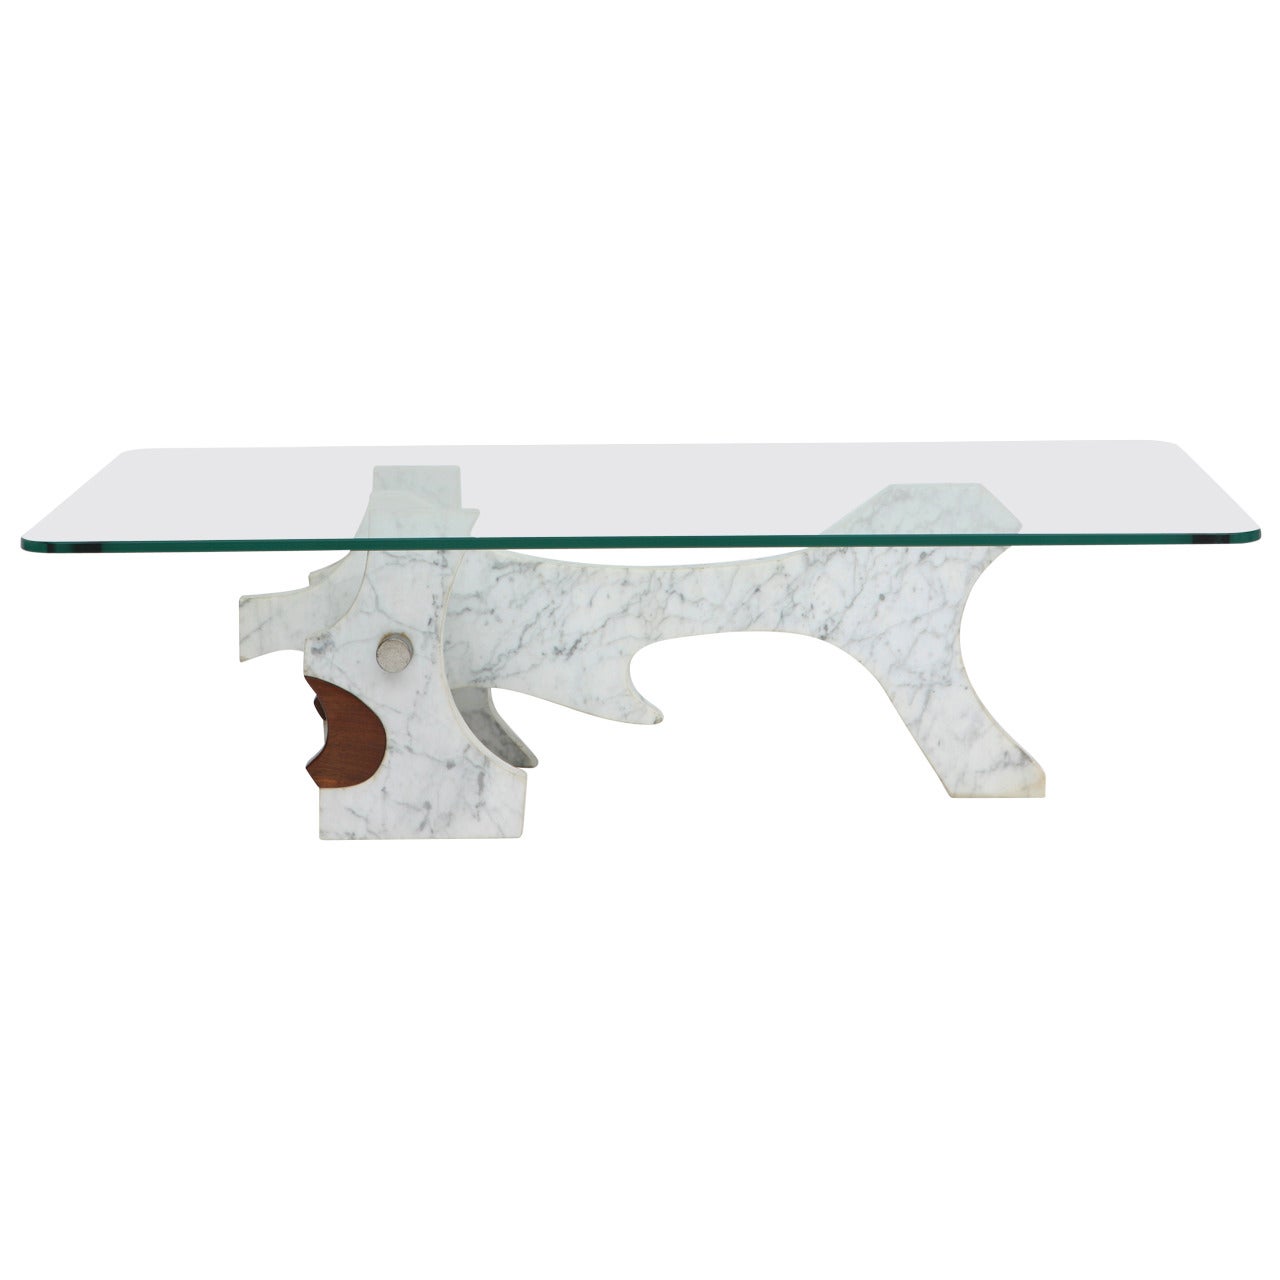 Fred Brouard Marble Coffee Table, circa 1984